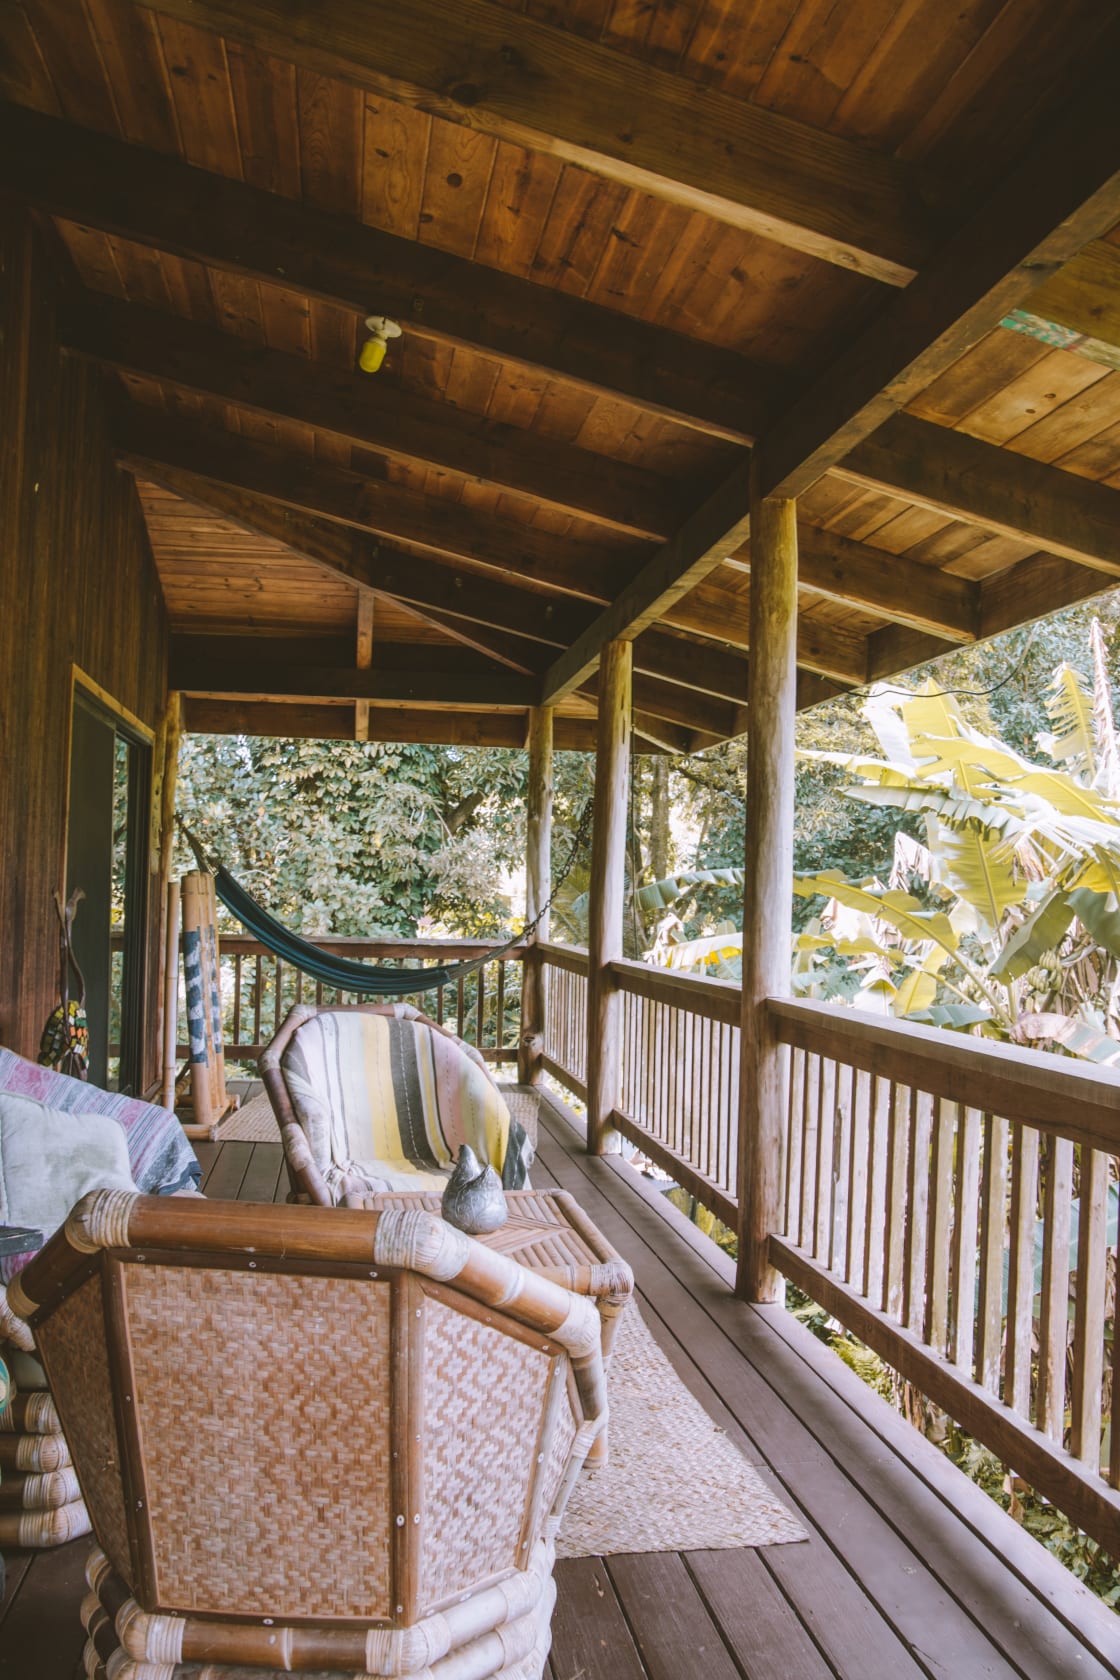 The back porch with seating, an amazing view and a hammock for relaxing and reading a book. Such a pretty spot to hang out